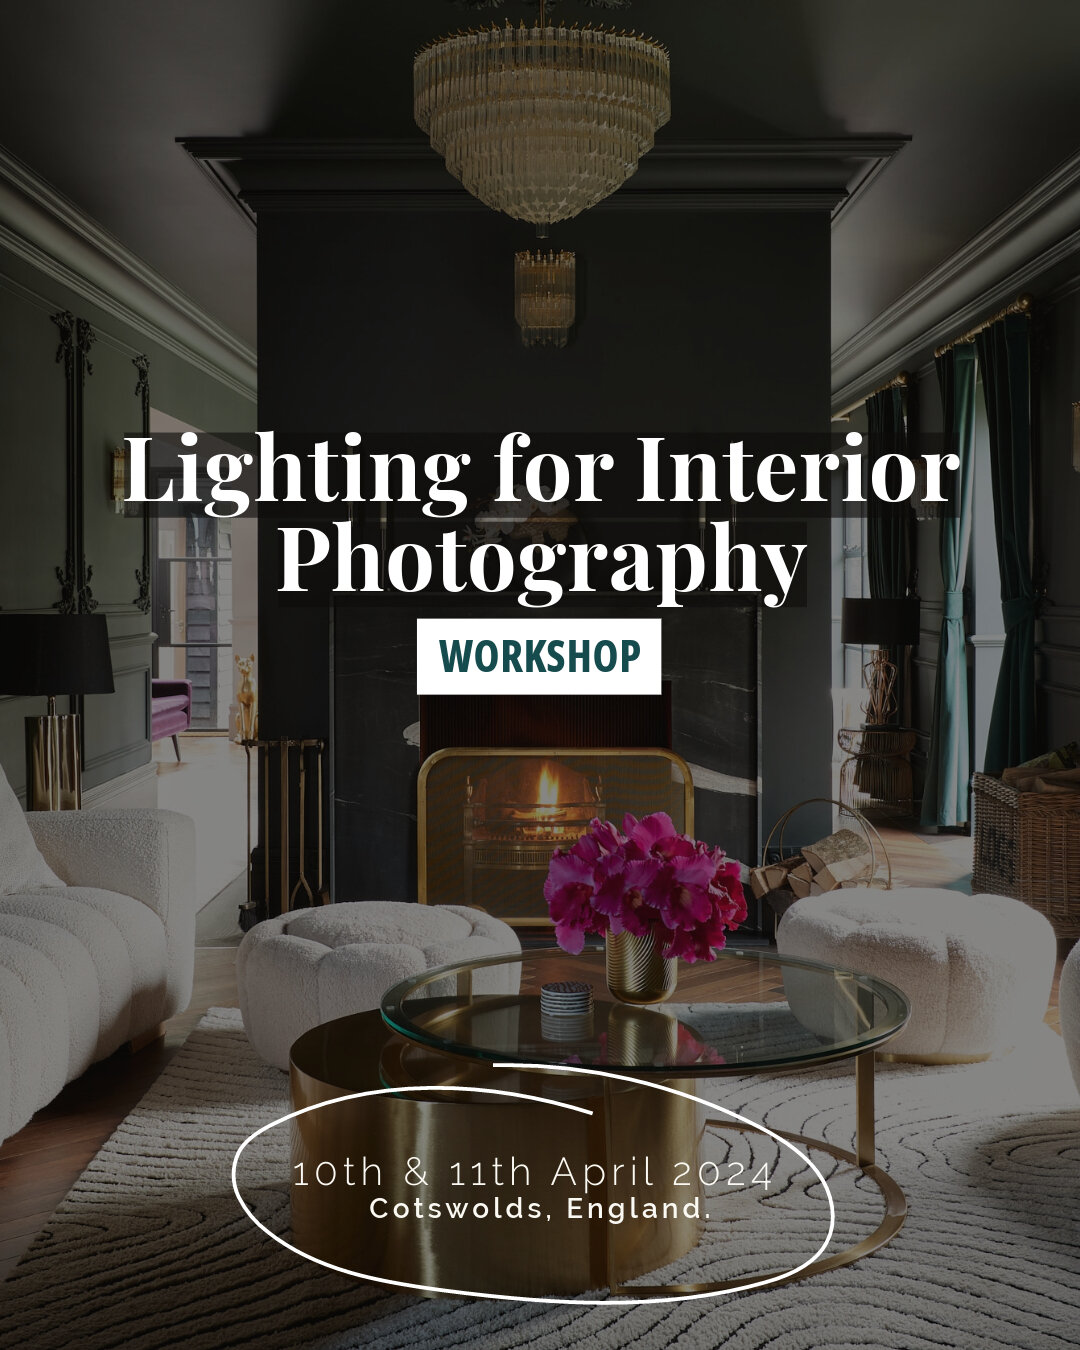 Join us in the Cotswolds for a 2-day, interactive workshop where I will teach my techniques for using strobe lighting in interior photography. 

The workshop will suit the interior/residential architectural photographer looking to improve their light